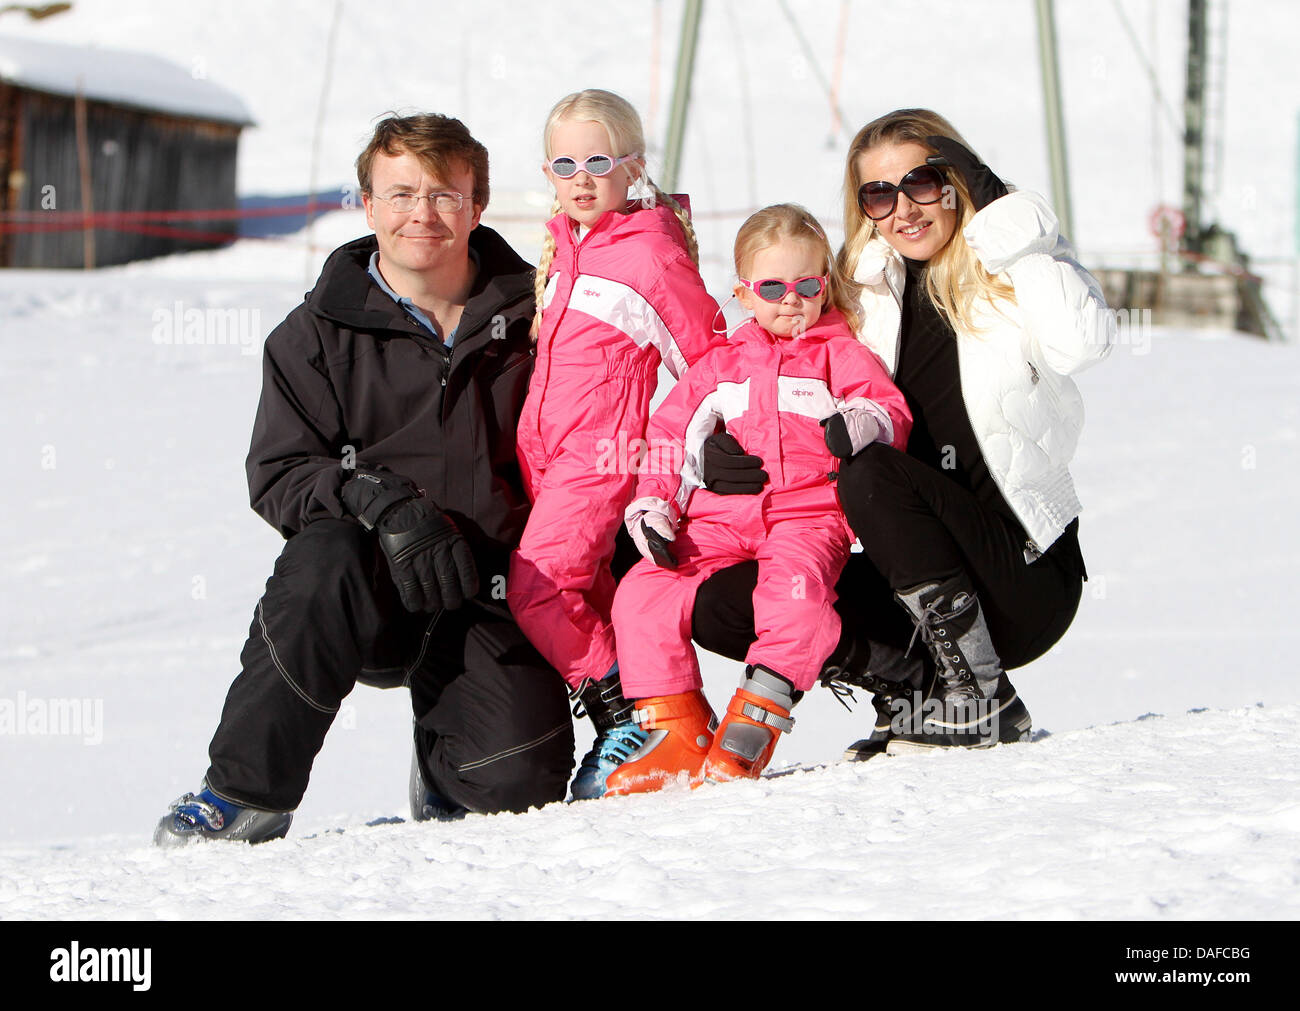 Prince Friso, Princess Mabel and their daughters Countess Luana and  Countess Zaria of The Nehtherlands pose for the media during their  wintersport holiday in Lech am Arlberg, Austria, 19 February 2011. Photo: